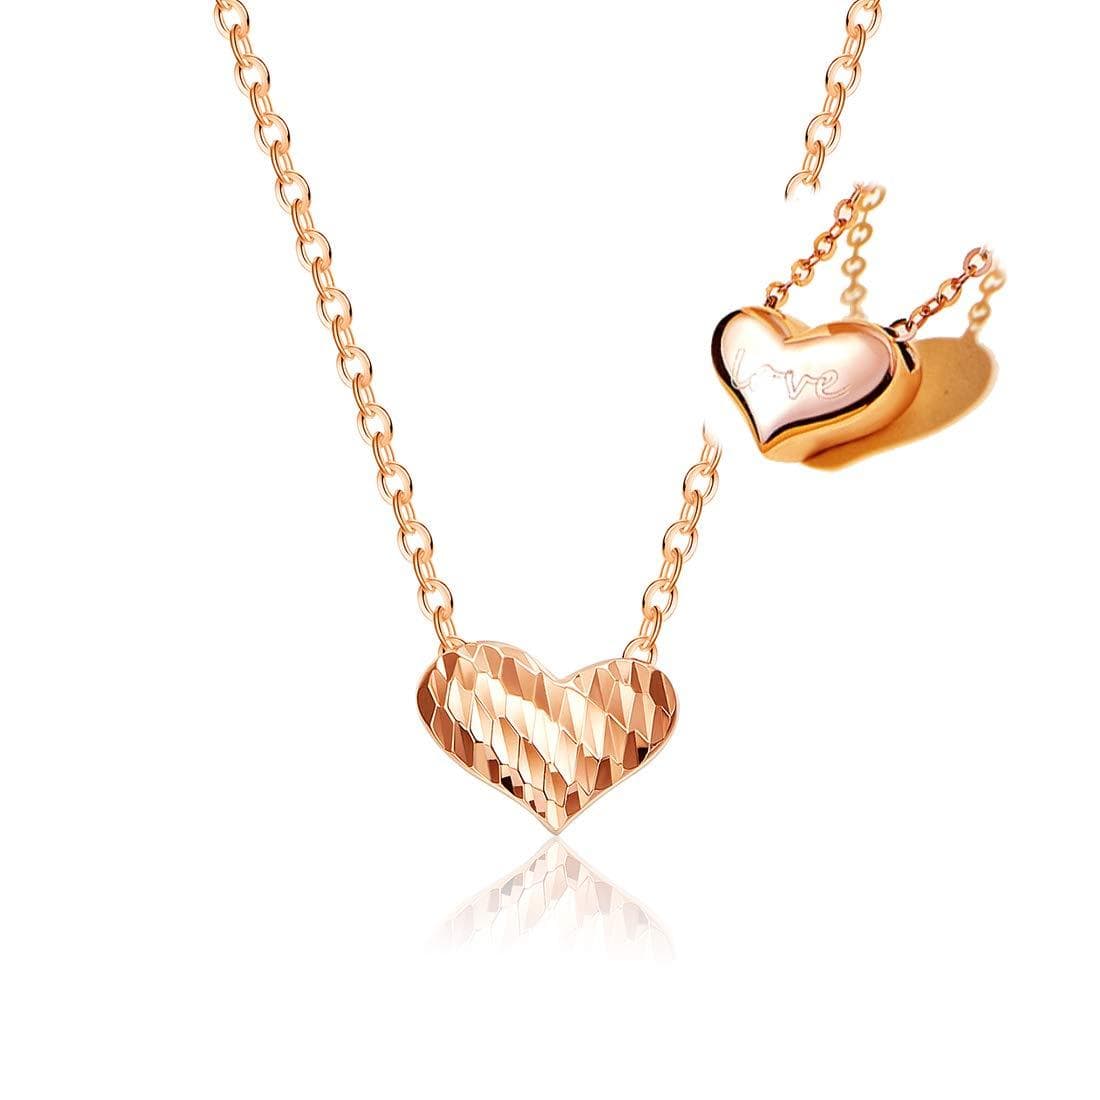 FANCIME "Heart To Heart" Engraved Love Letter 18K Gold Necklace Rose Gold Main